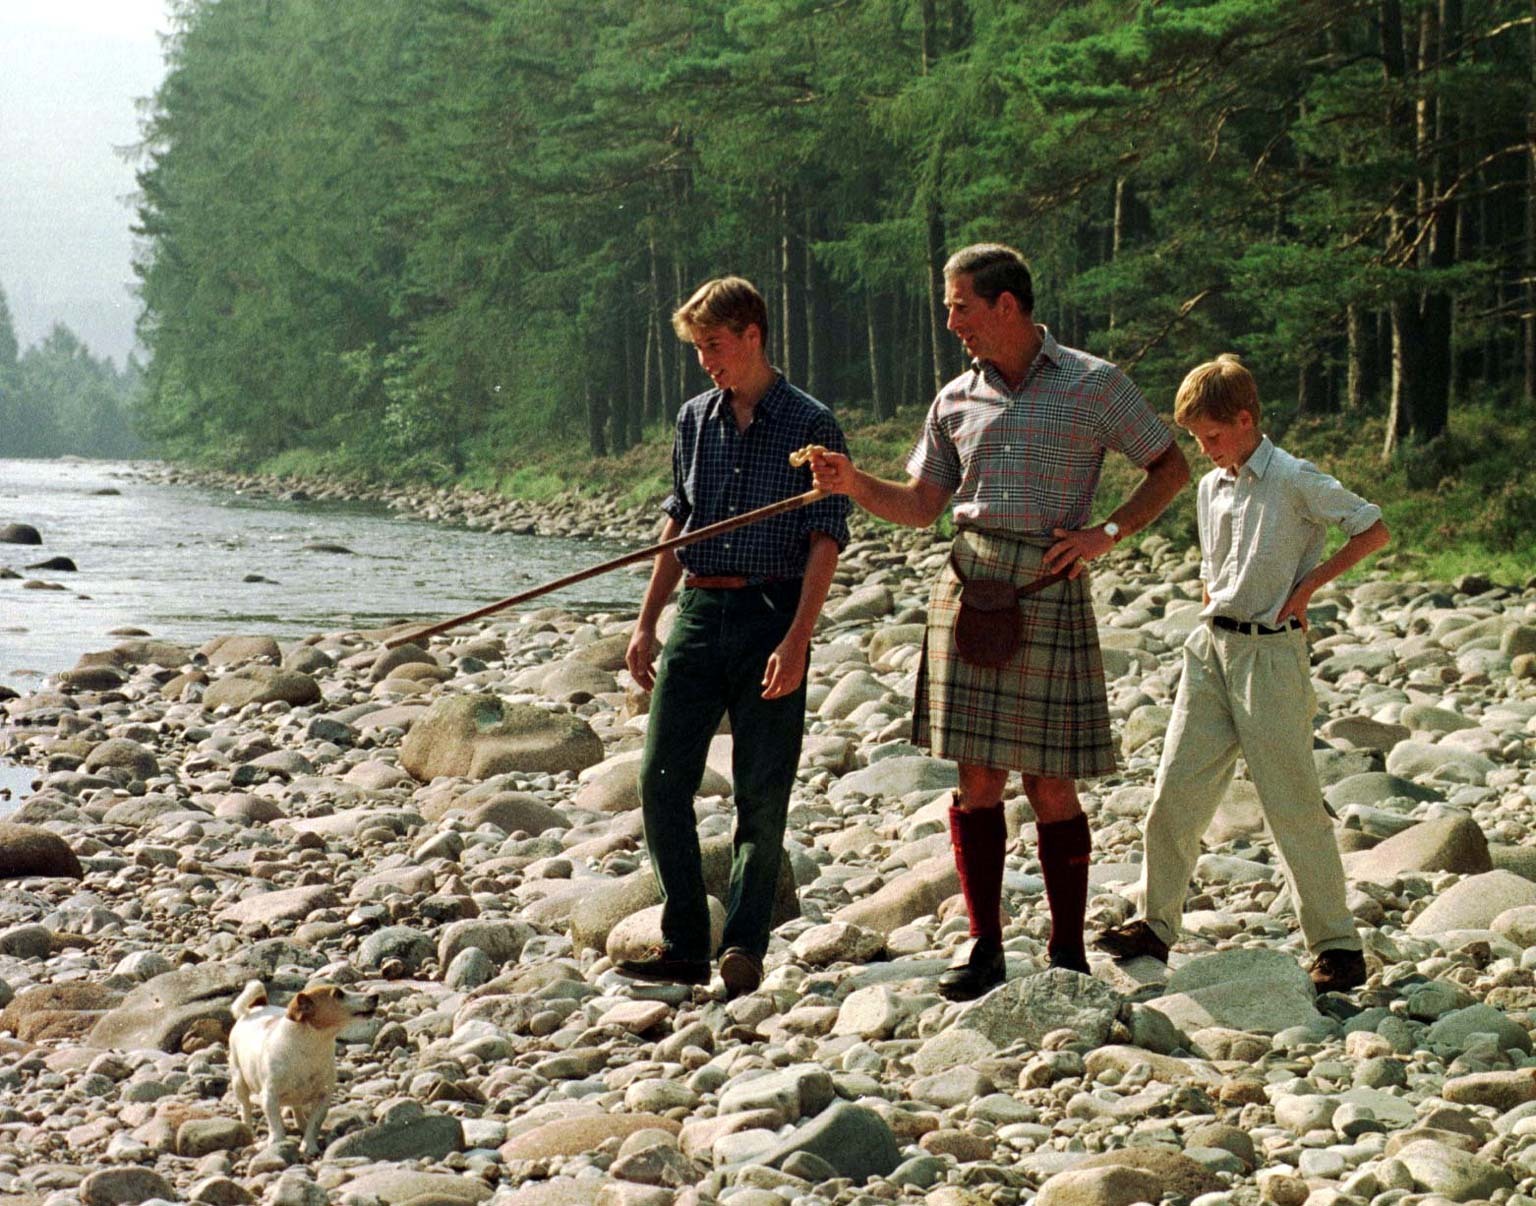 The Prince of Wales and his sons William, 15, and Harry, 12, take an early morning walk along the banks of the River Dee on the Balmoral estate in 1997.